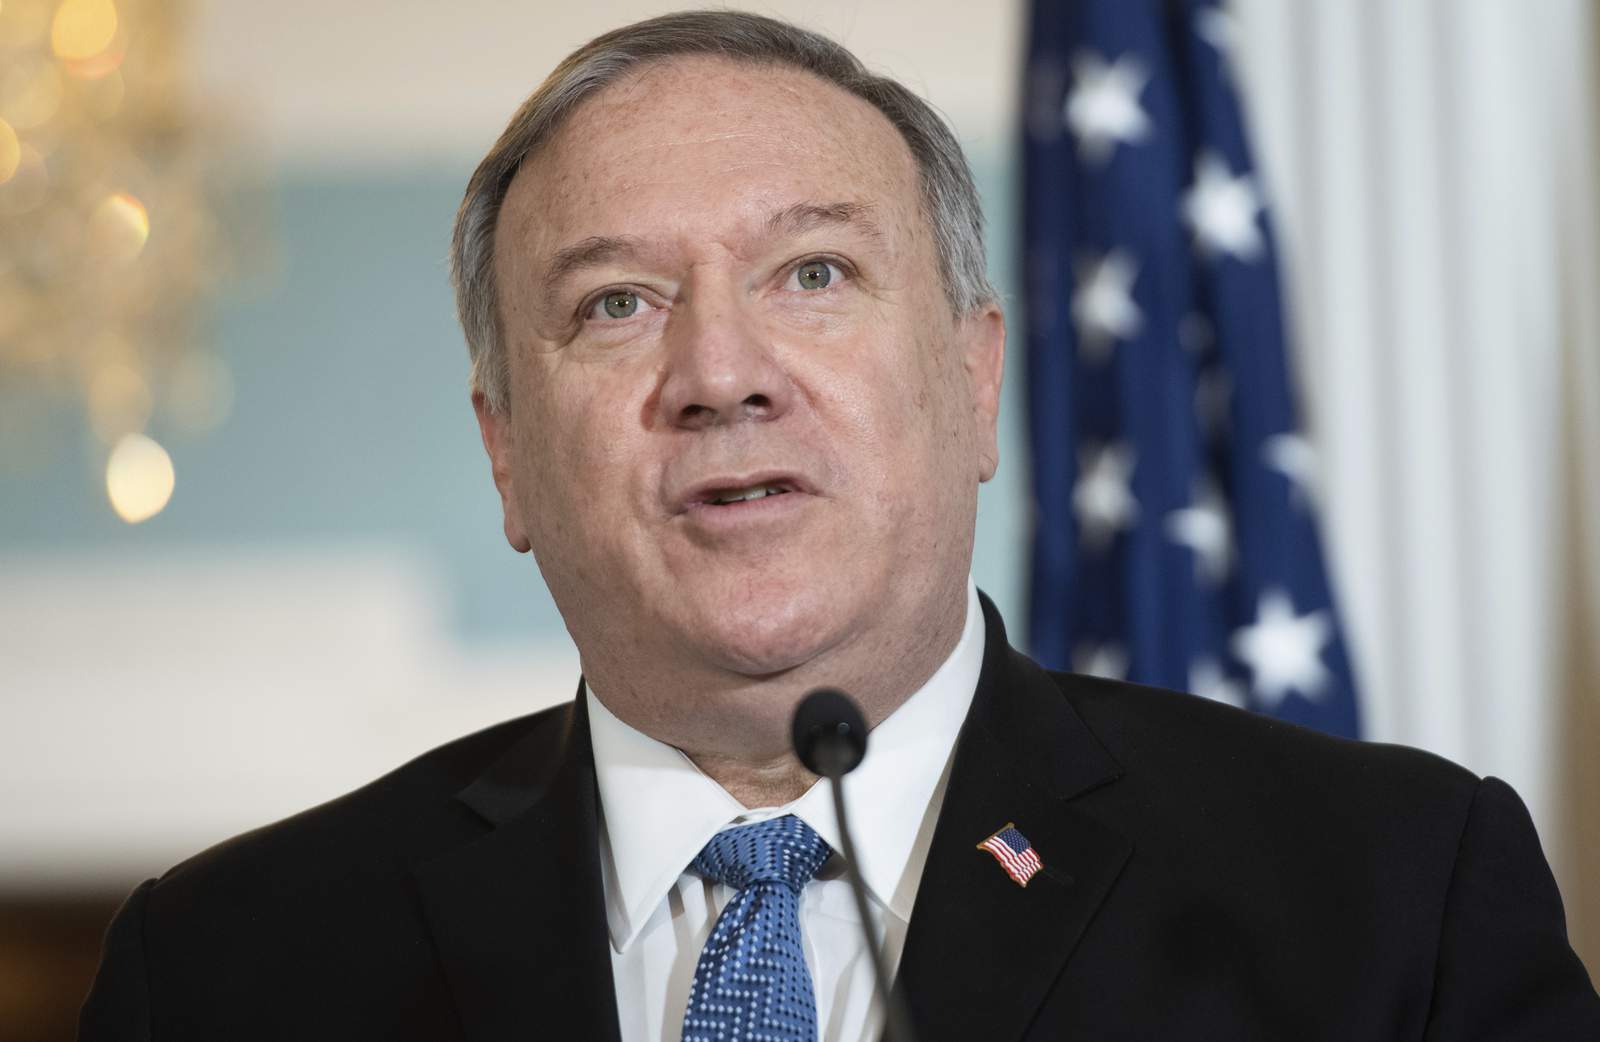 Pompeo voids restrictions on diplomatic contacts with Taiwan